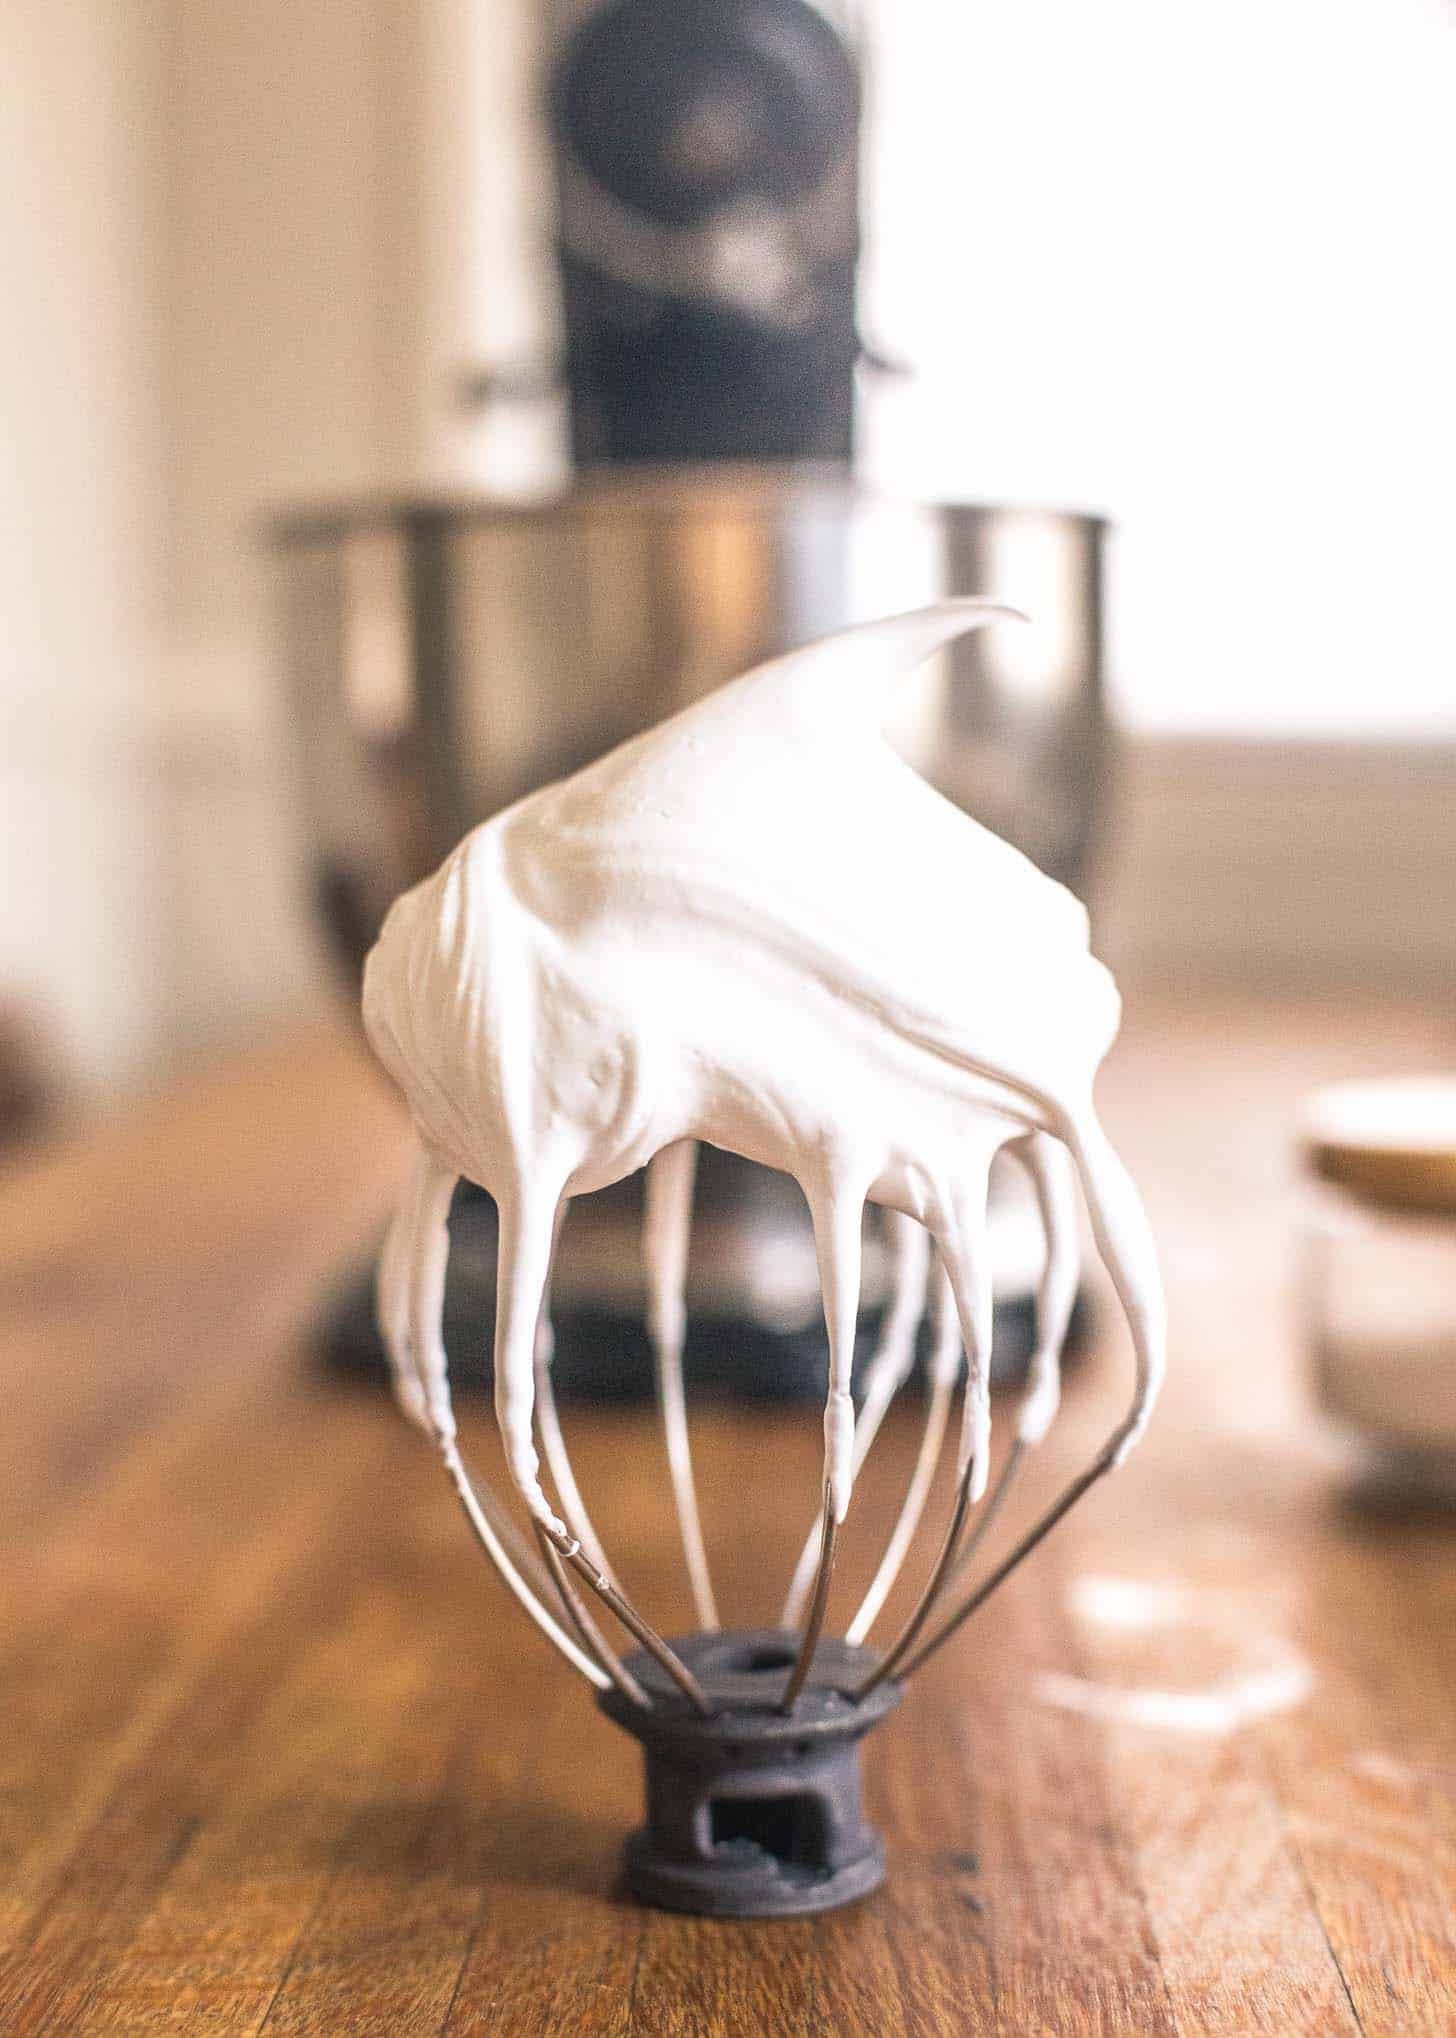 Meringue on a whisk